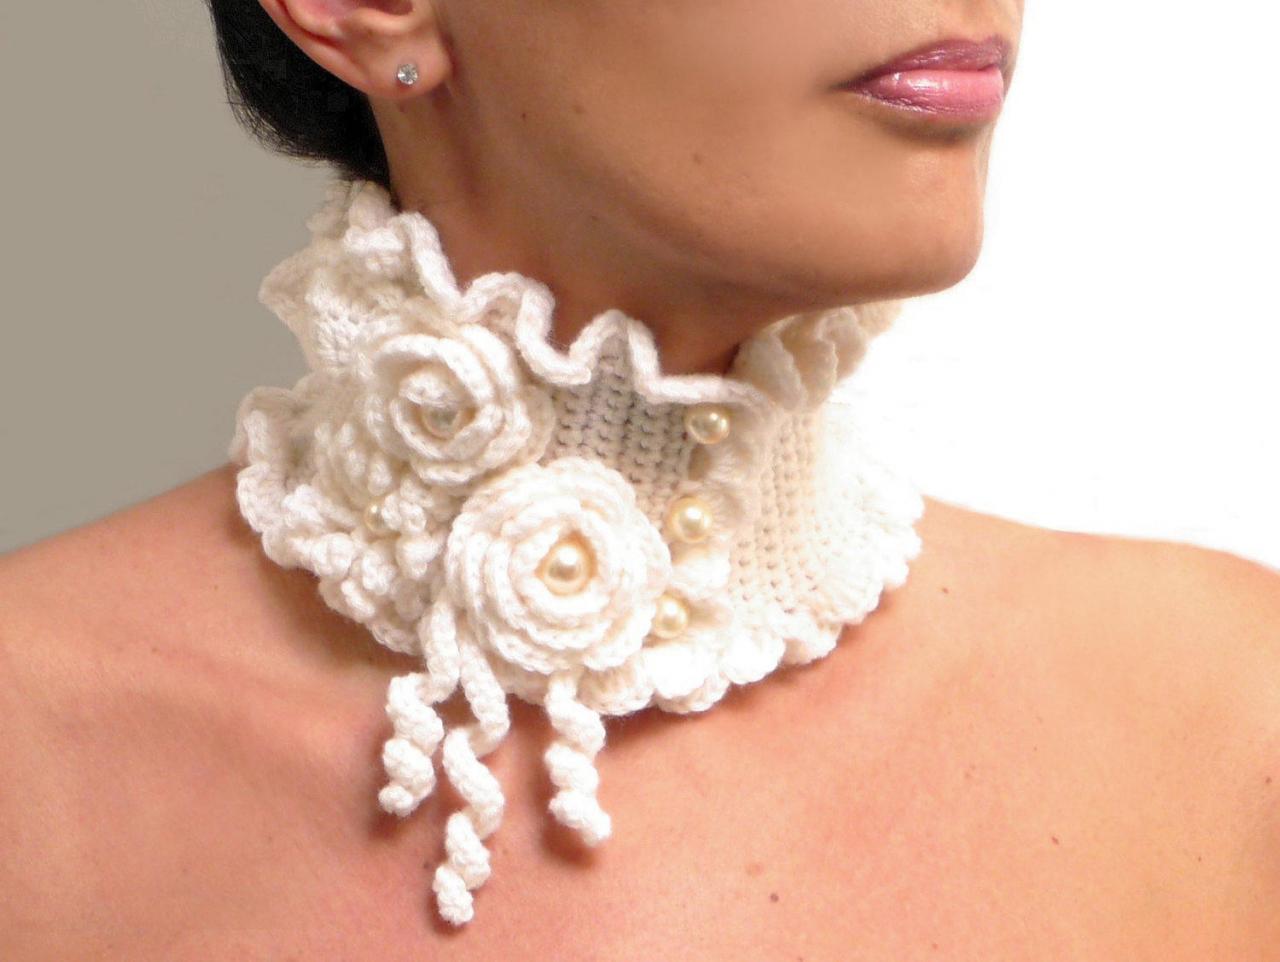 Crocheted White Neckwarmer With Flowers And Glass Pearls - Lux Cowl Choker - White Garden